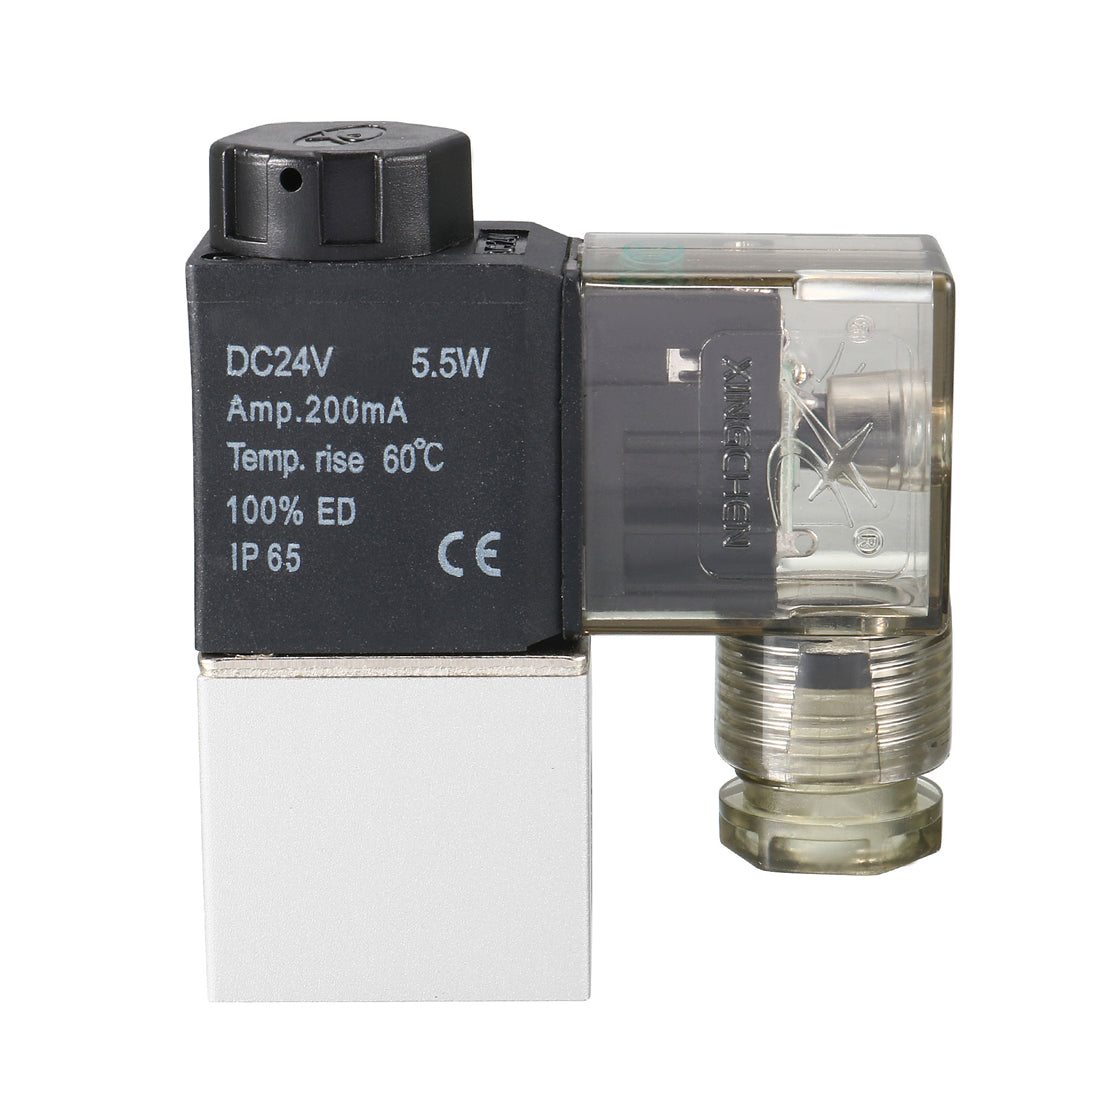 uxcell Uxcell 2V025-08 Pneumatic Air NC Single Electrical Control Solenoid Valve DC 24V 2 Way 2 Position 1/4" PT Internally Piloted Acting Type